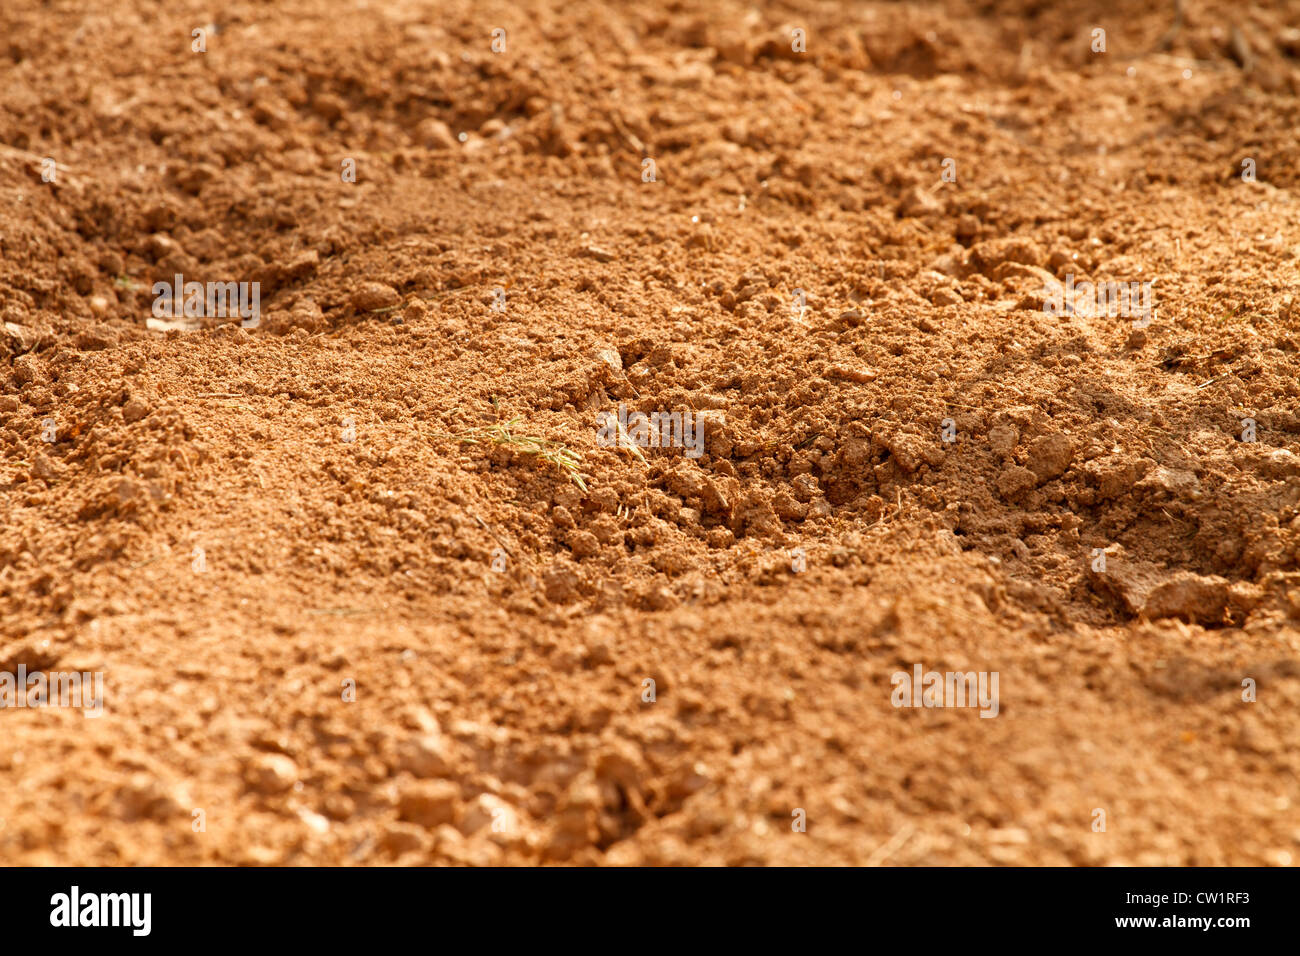 Close-up shot of red clay soil dirt in a farm field in South Carolina. This type of soil is common in the Southeastern USA. Stock Photo